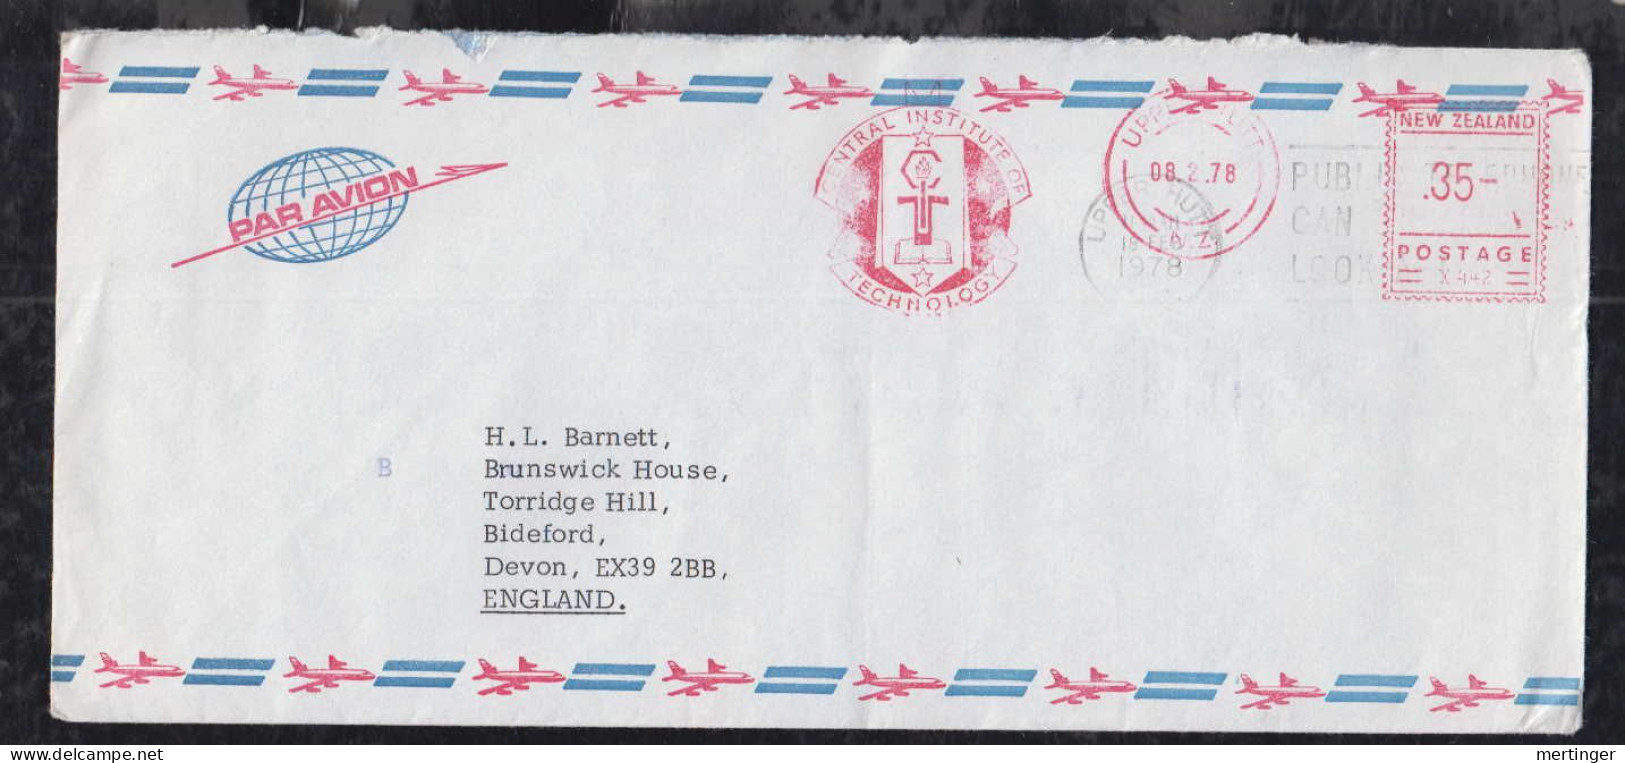 New Zealand 1978 Meter Airmail Cover 35c UPPER HUTT To Bideford England Central Institute Of Technology - Storia Postale